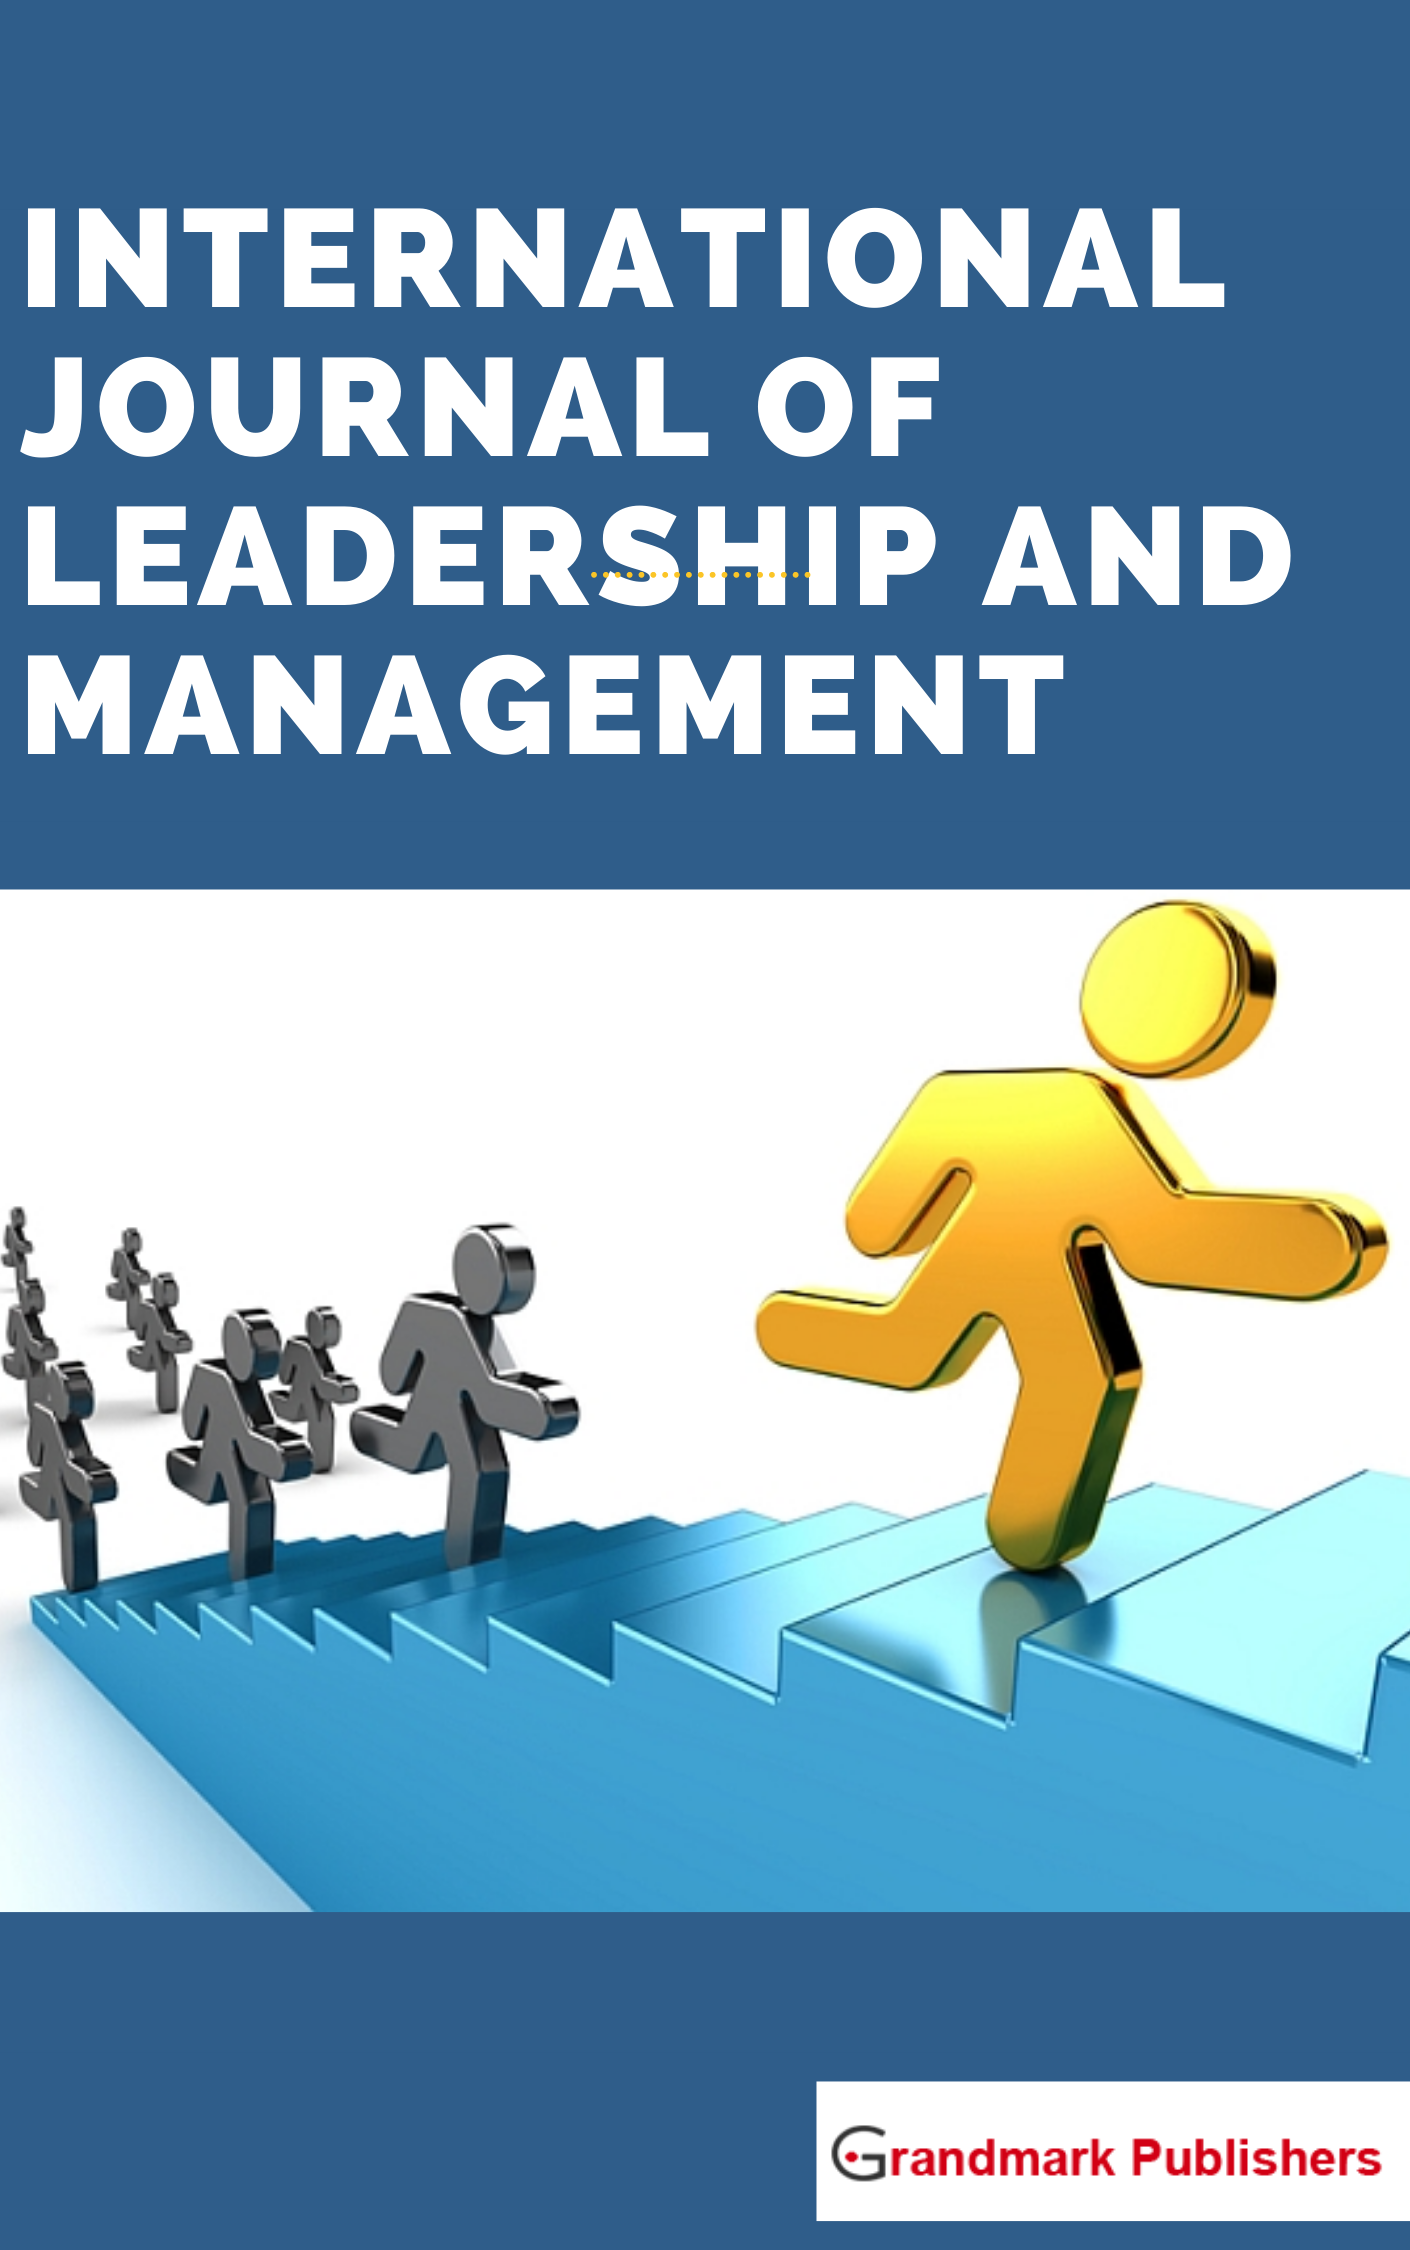 leadership and management research articles